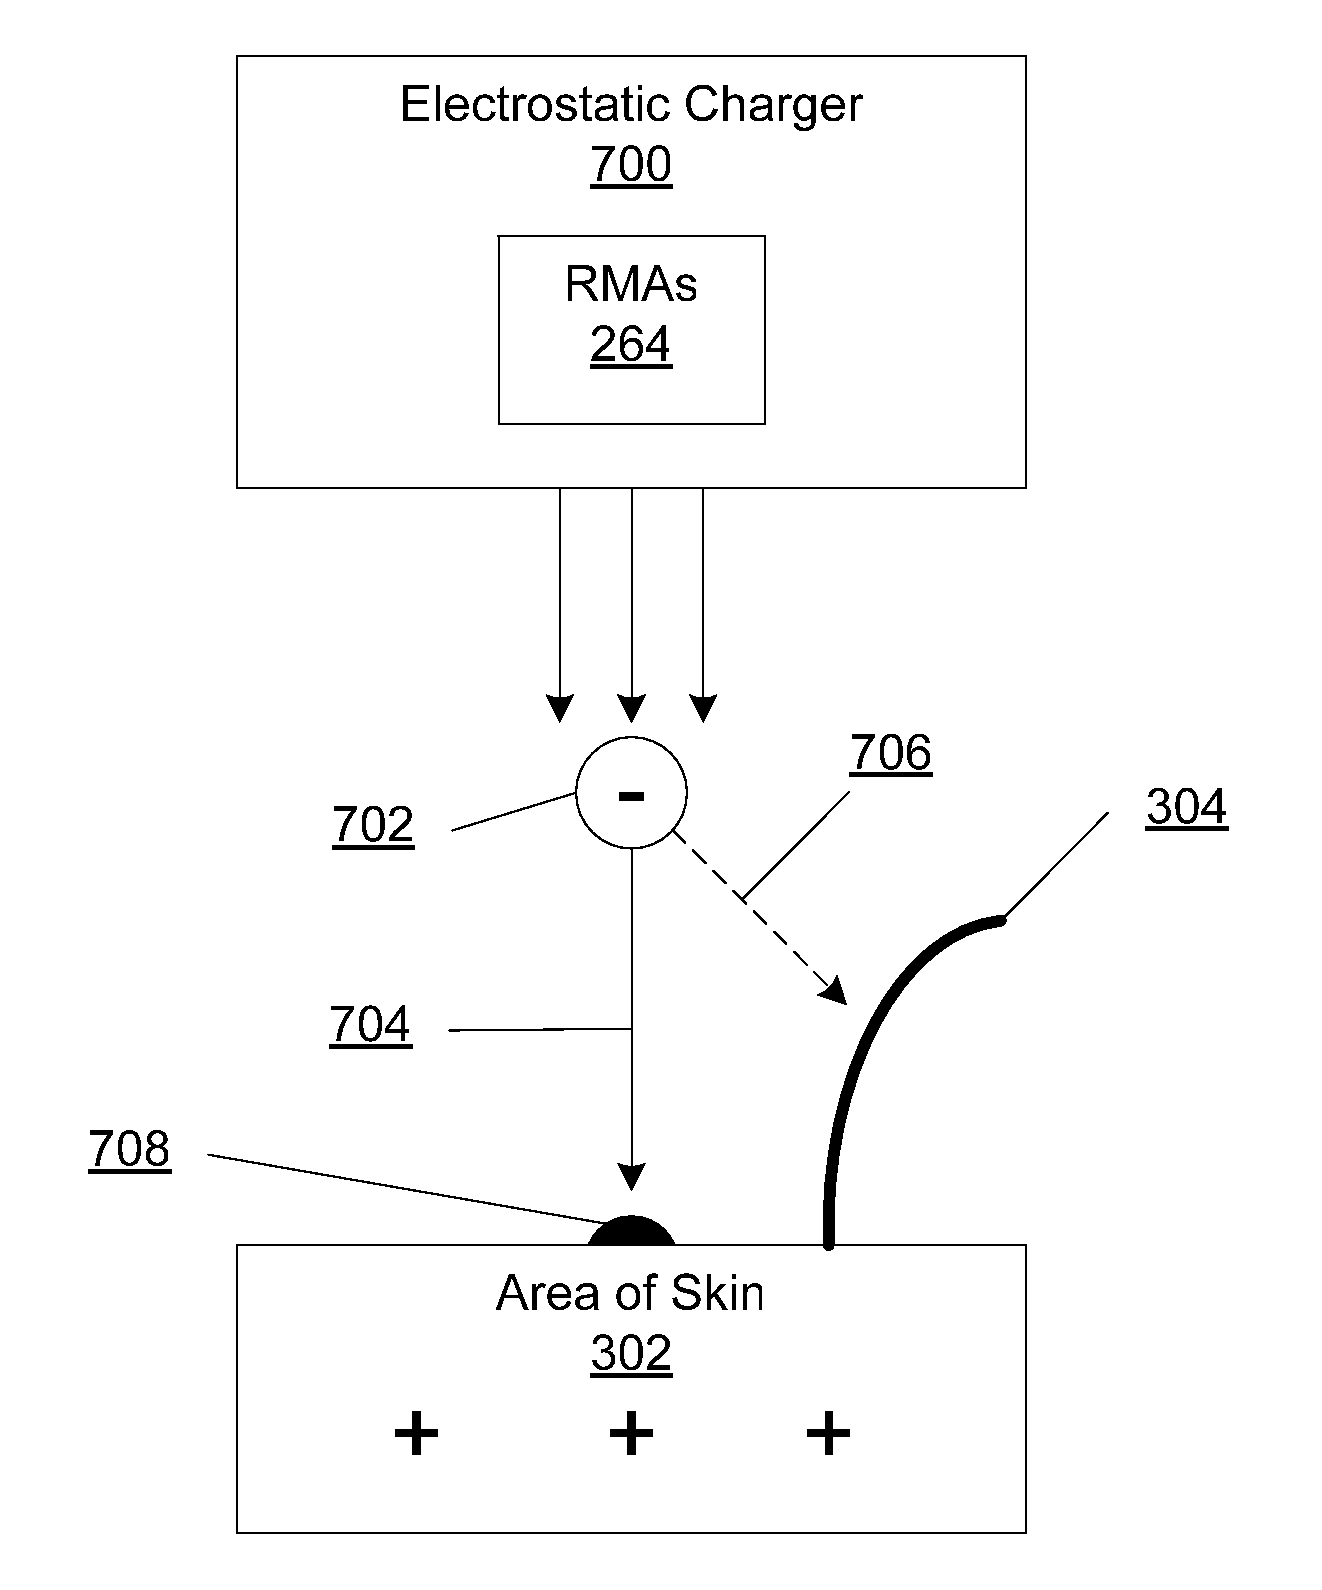 System and method for applying a reflectance modifying agent electrostatically to improve the visual attractiveness of human skin